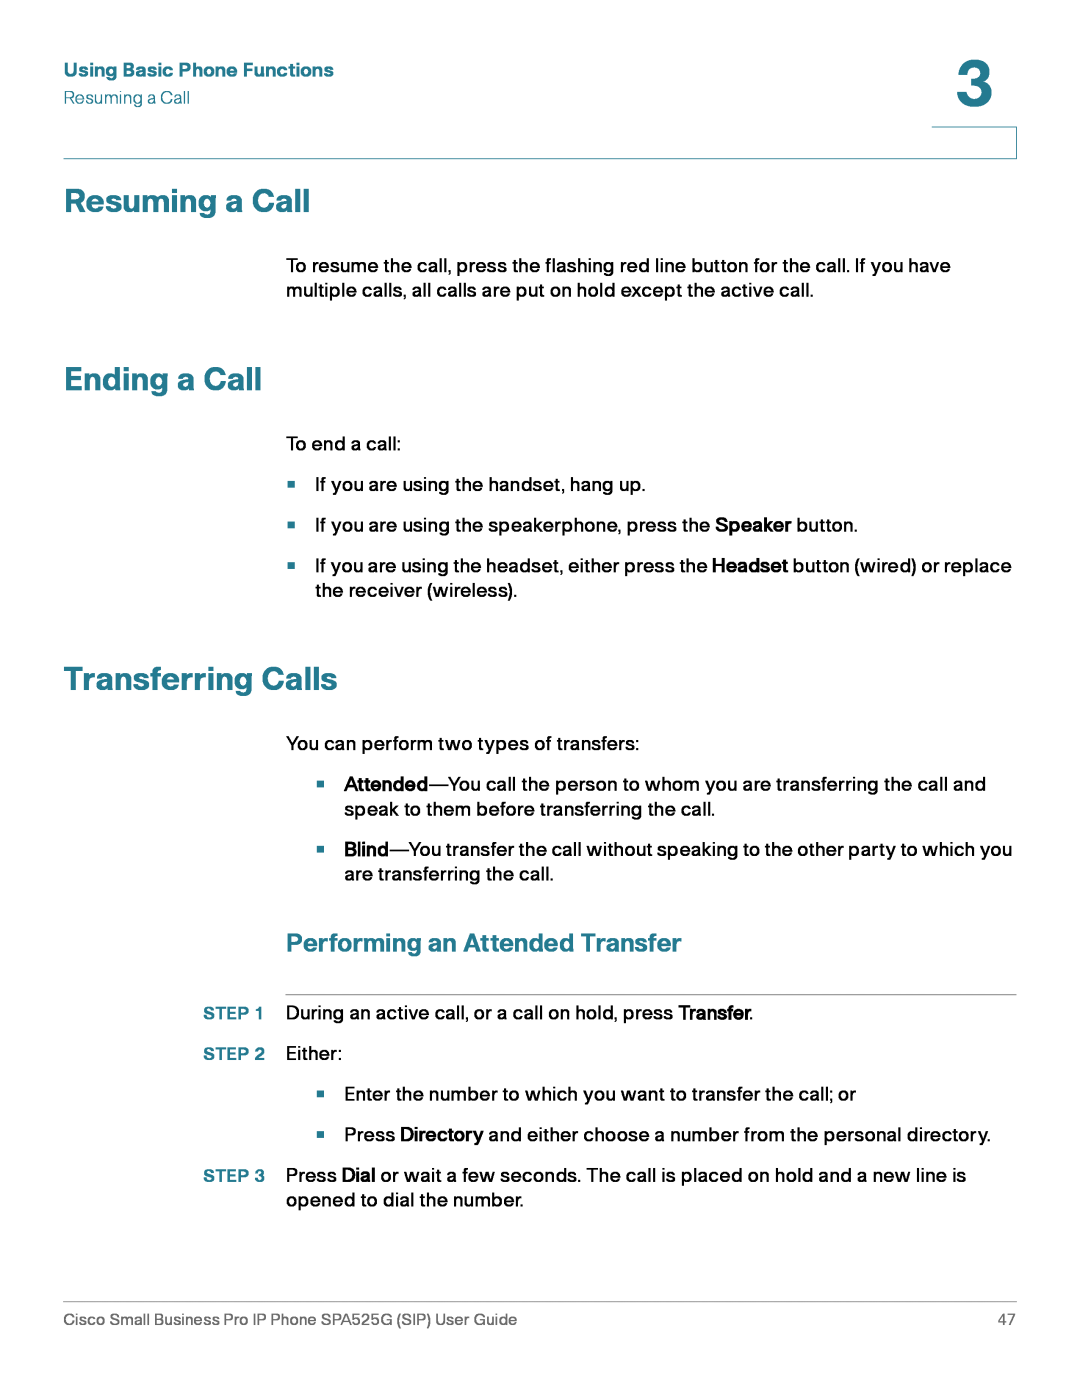 Cisco Systems SPA525G manual Resuming a Call, Ending a Call, Transferring Calls, Performing an Attended Transfer 